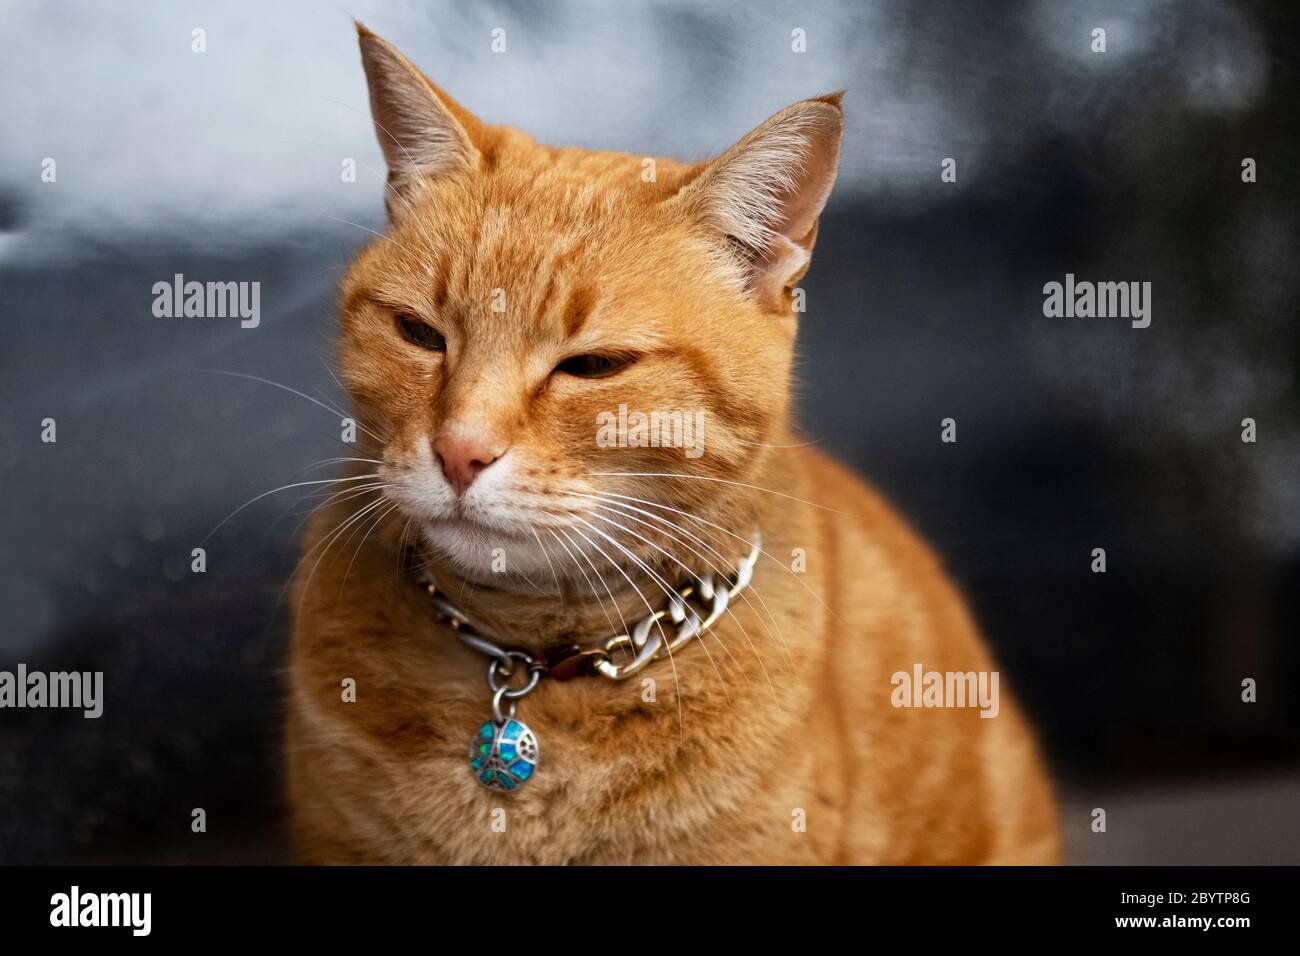 Portrait of a Ginger kitten with collar. Stock Photo